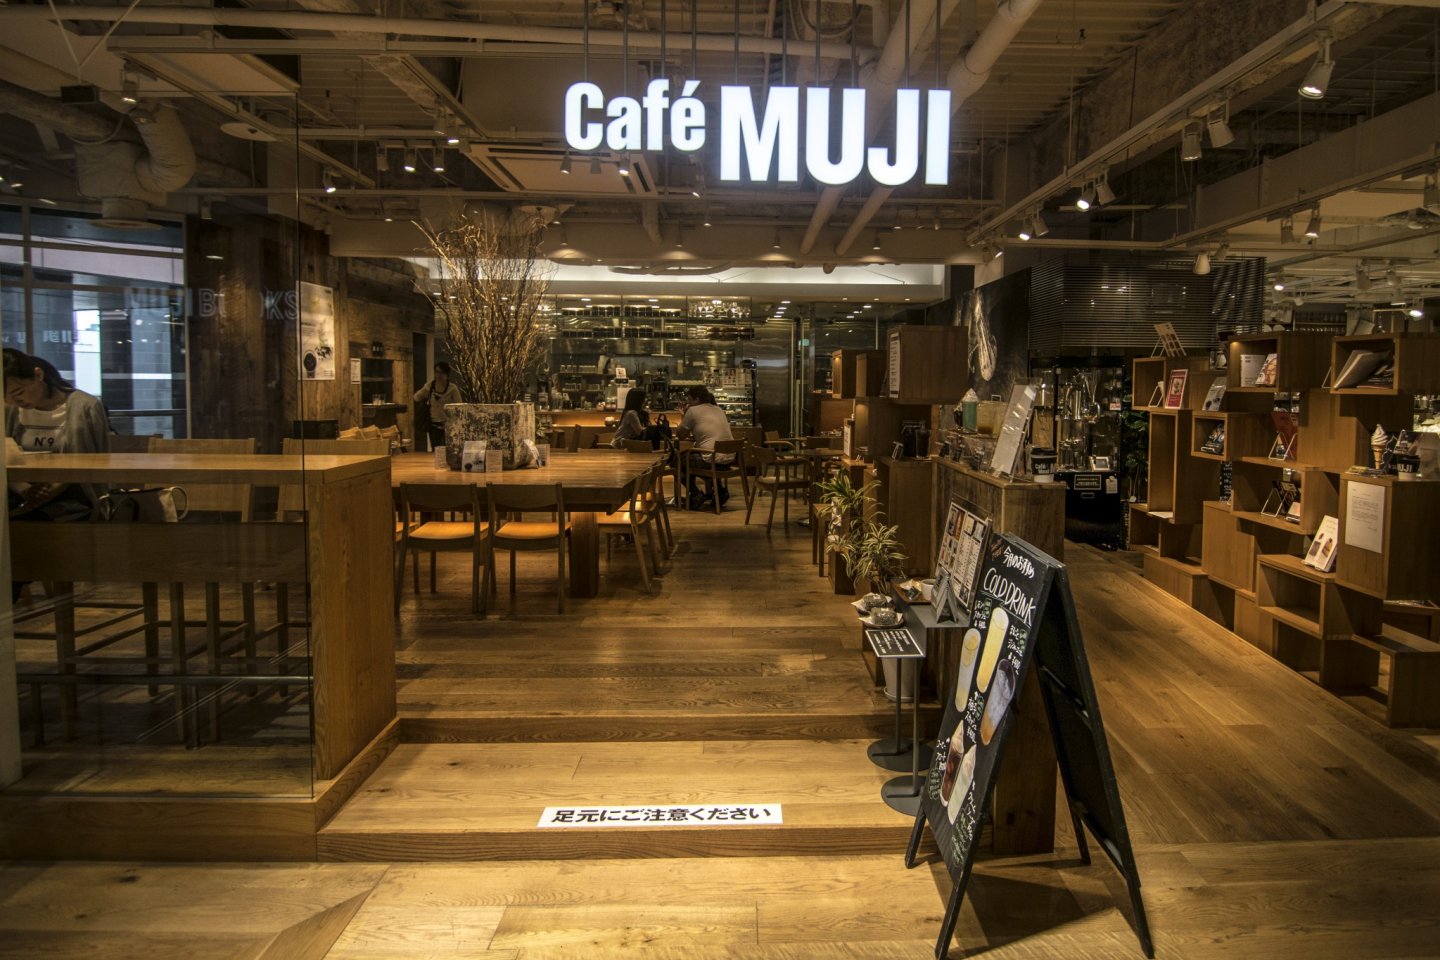 Visitors from the entire Kyushu Region, as well as the nearby Chugoku Region flock here to visit the one and only Café & Meal MUJI (Canal City Fukuoka) in Fukuoka and Kyushu.